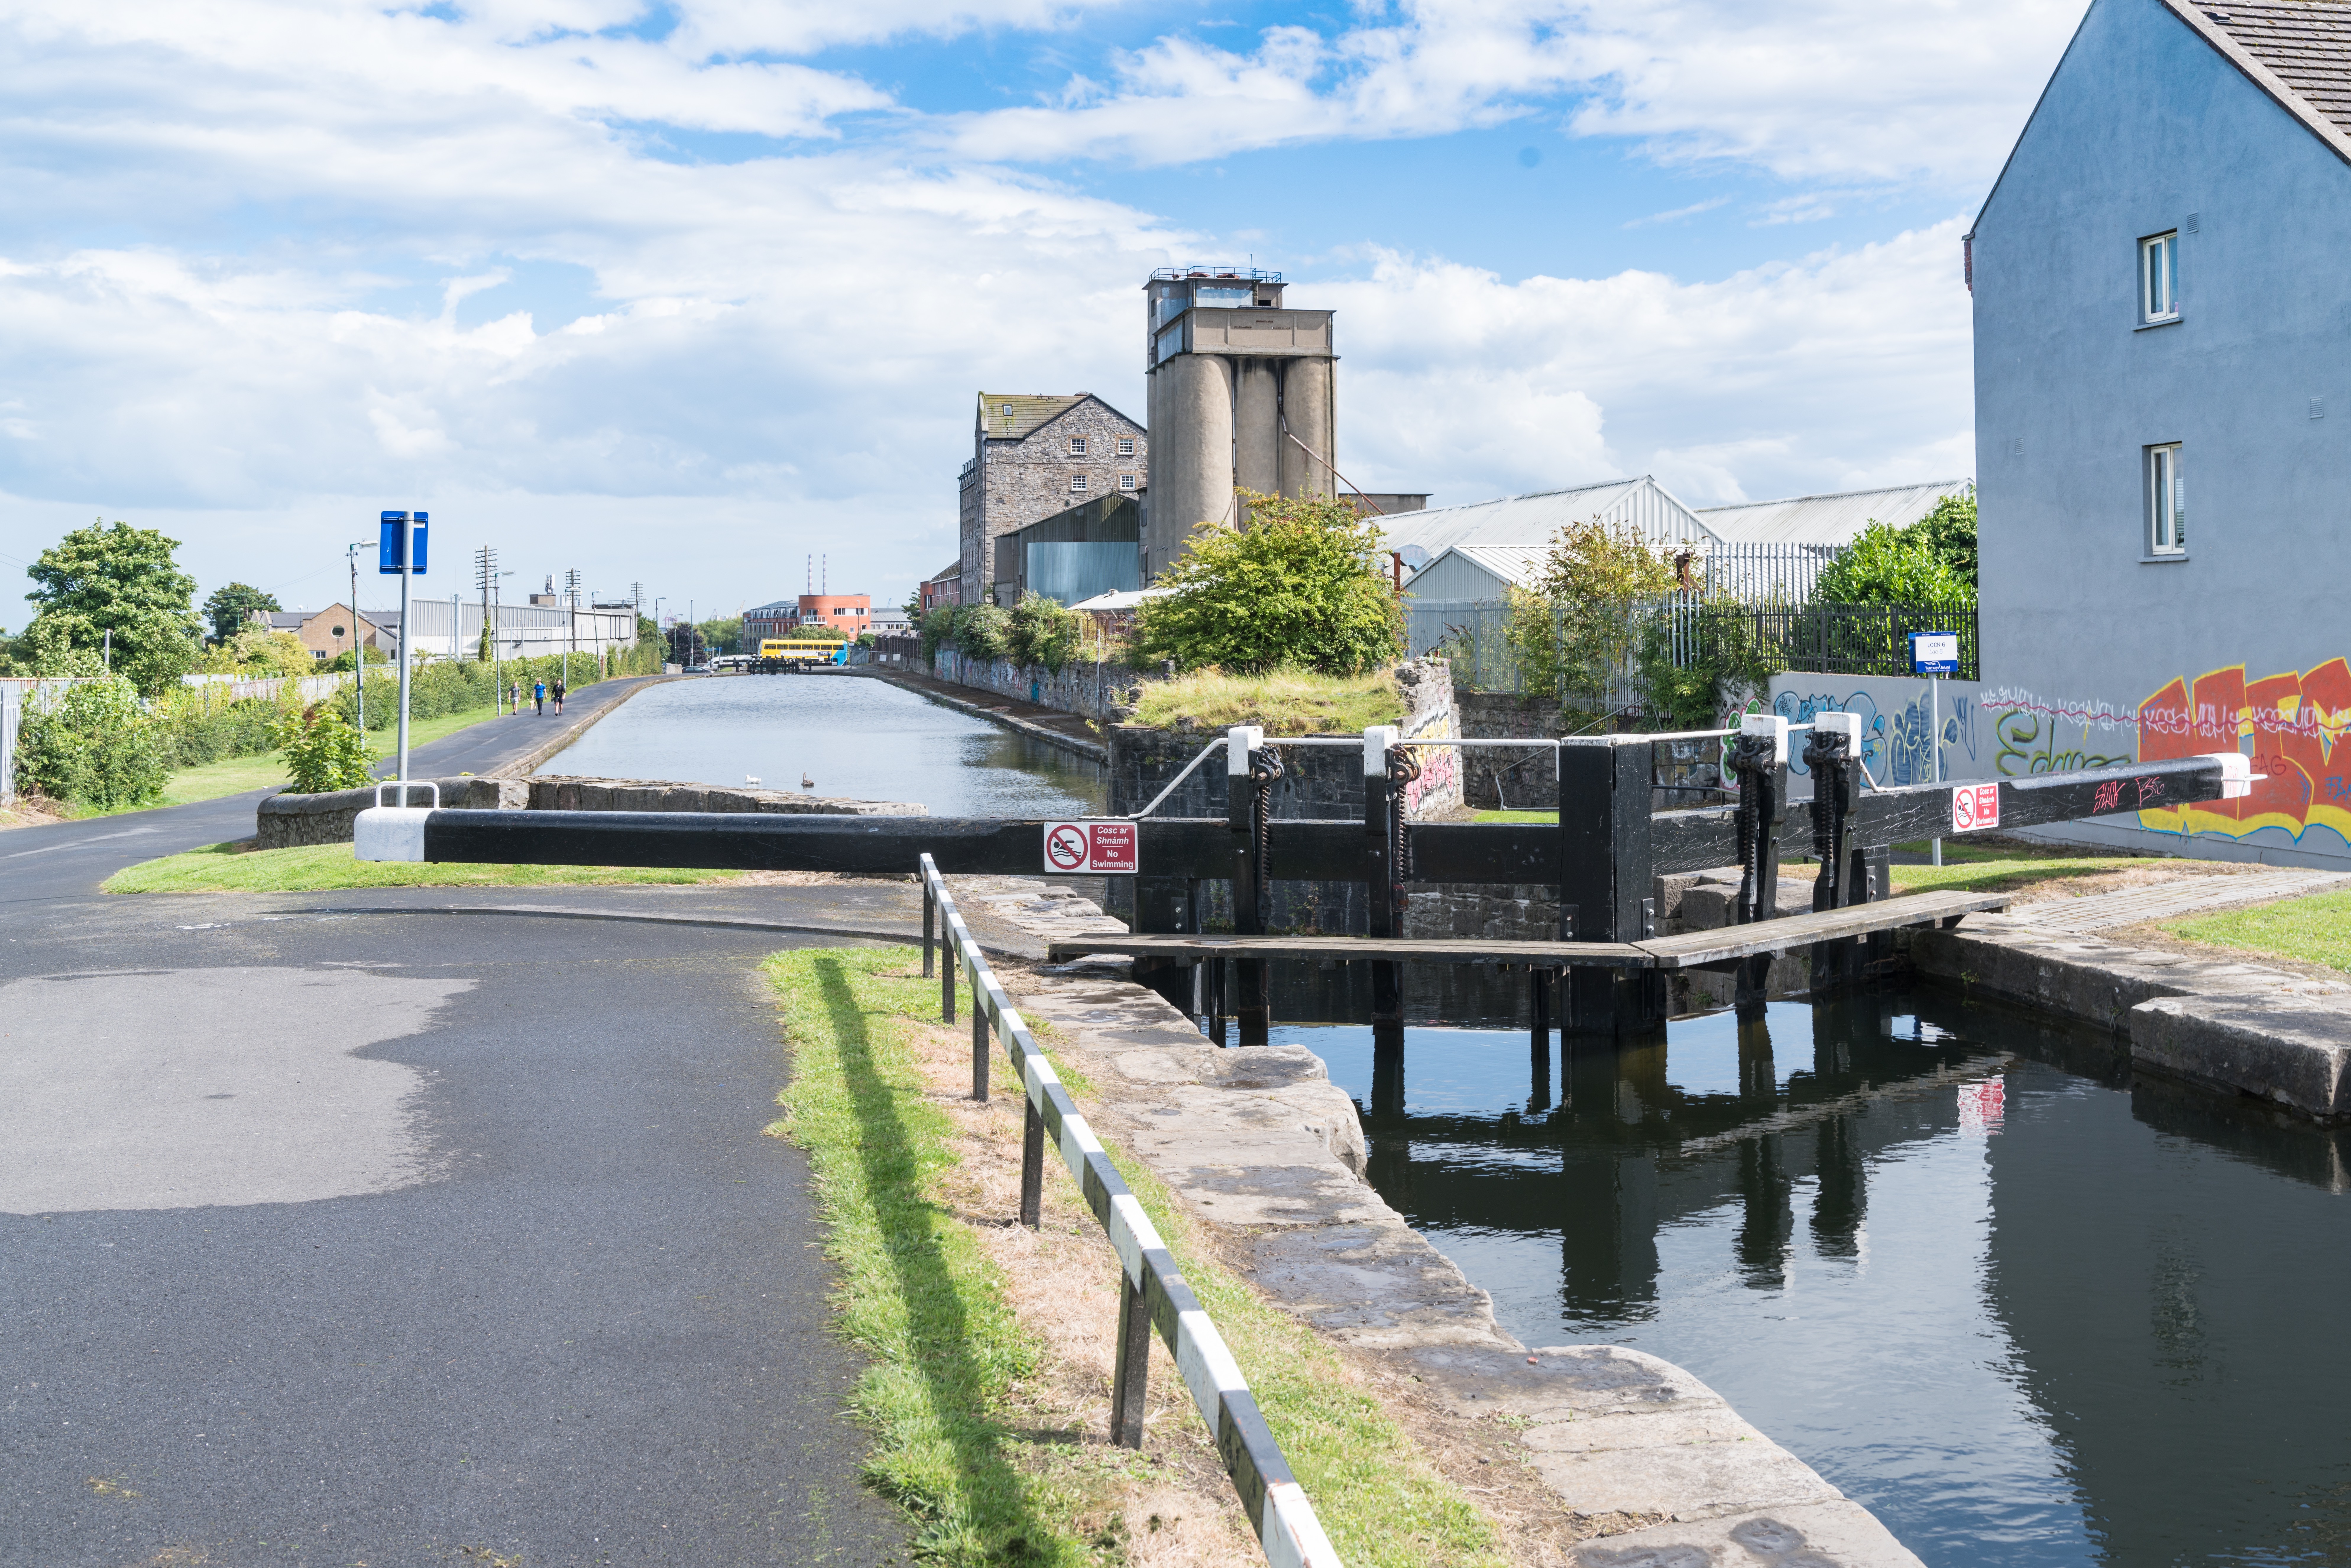  ROYAL CANAL - CABRA AREA 022 